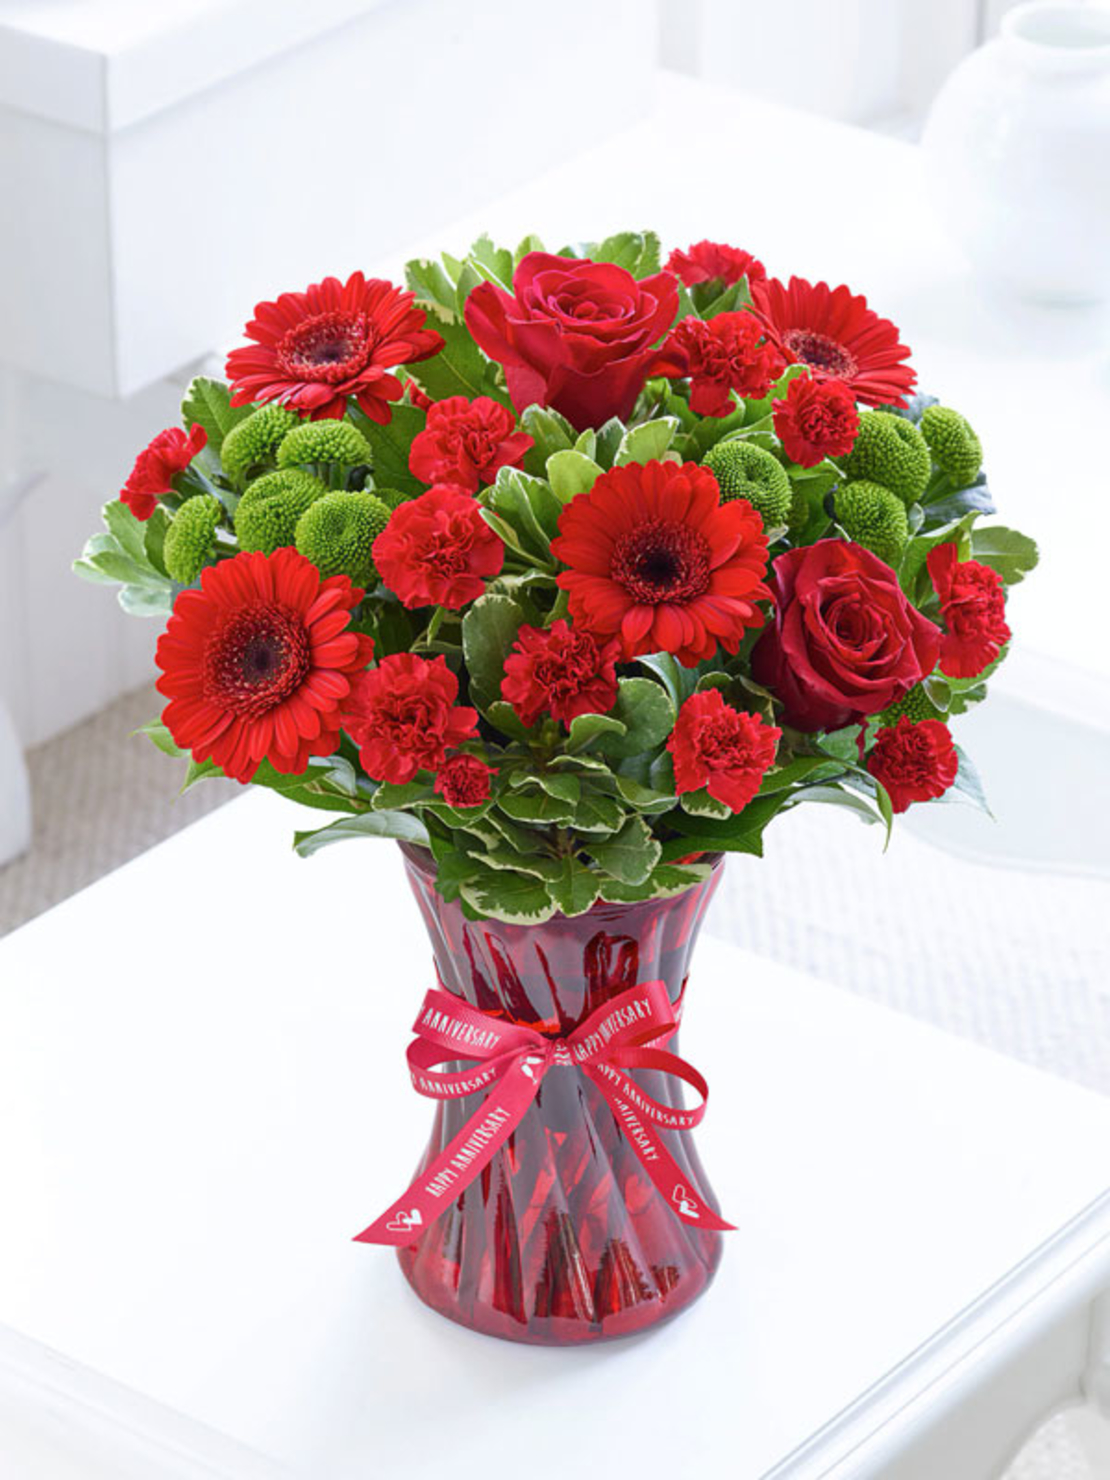 Bouquet with red rose, gerbera and cloves #122